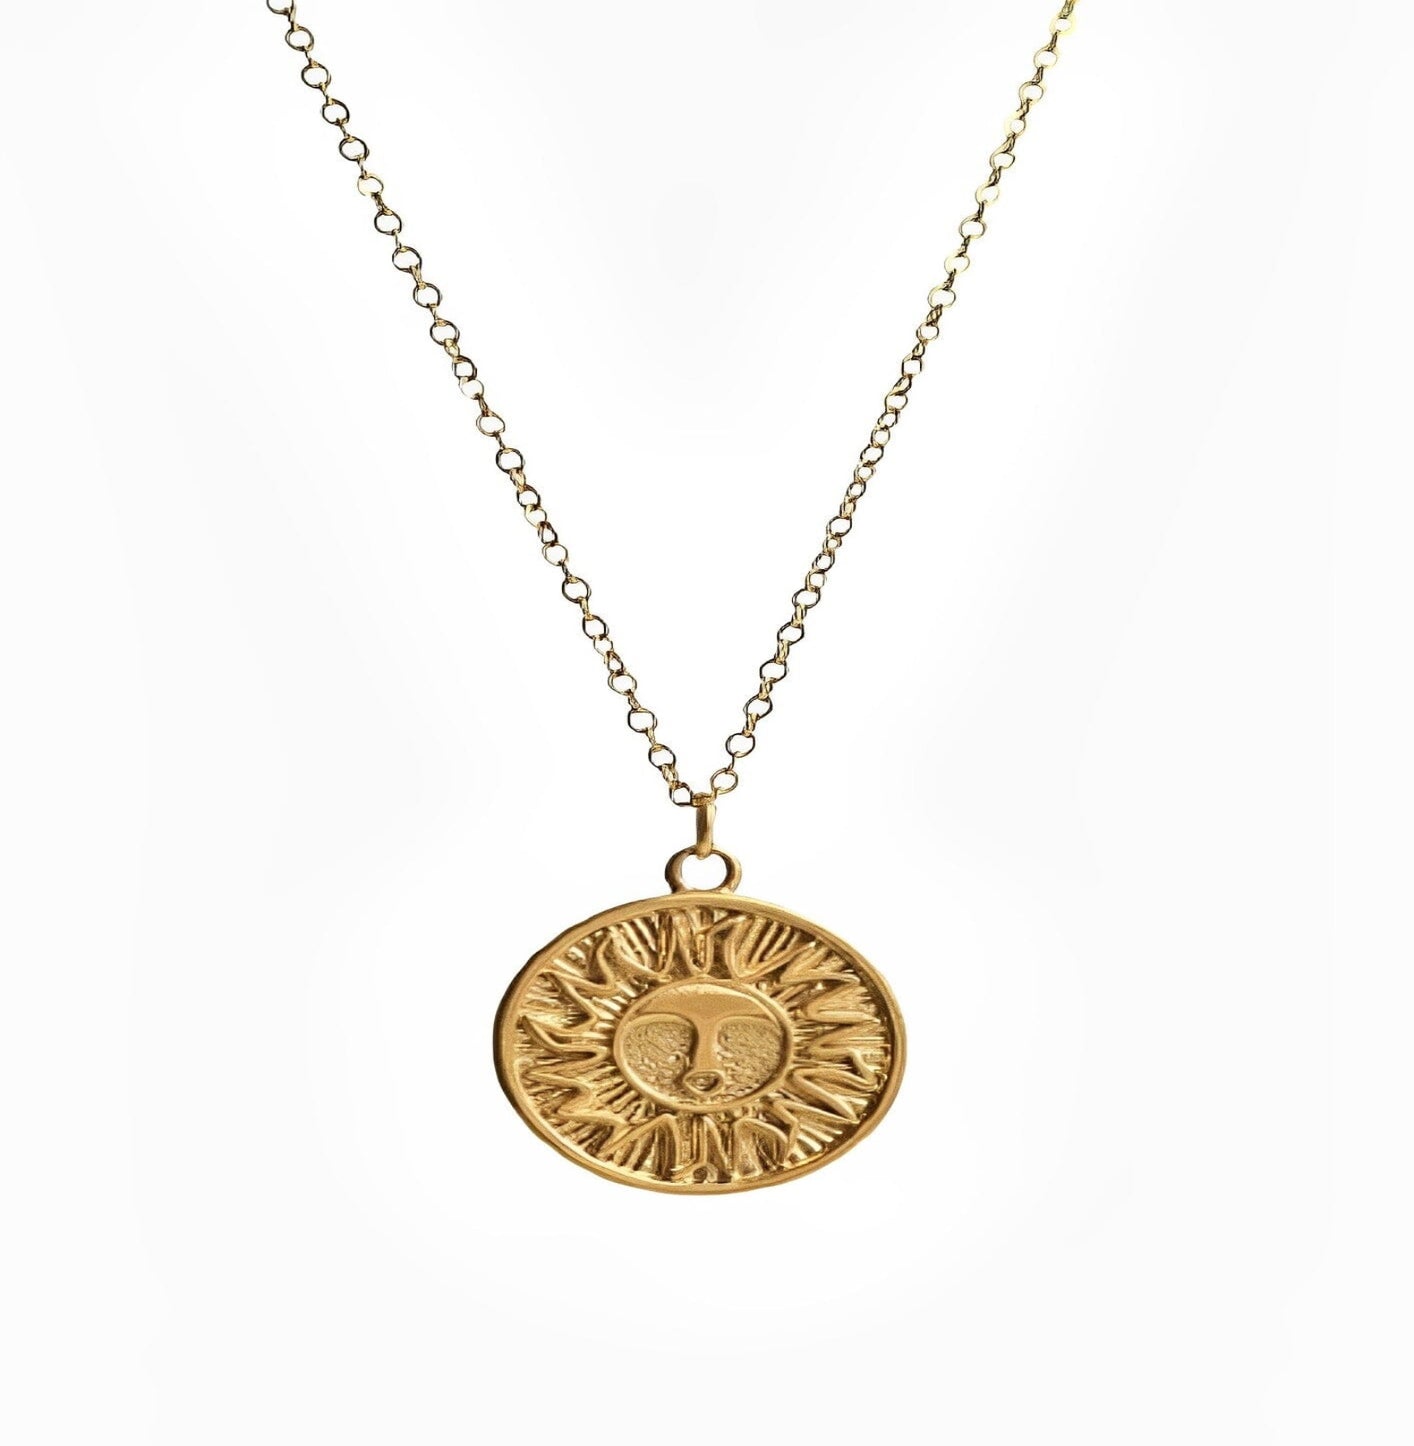 FACE SUN NECKLACE neck Yubama Jewelry Online Store - The Elegant Designs of Gold and Silver ! 